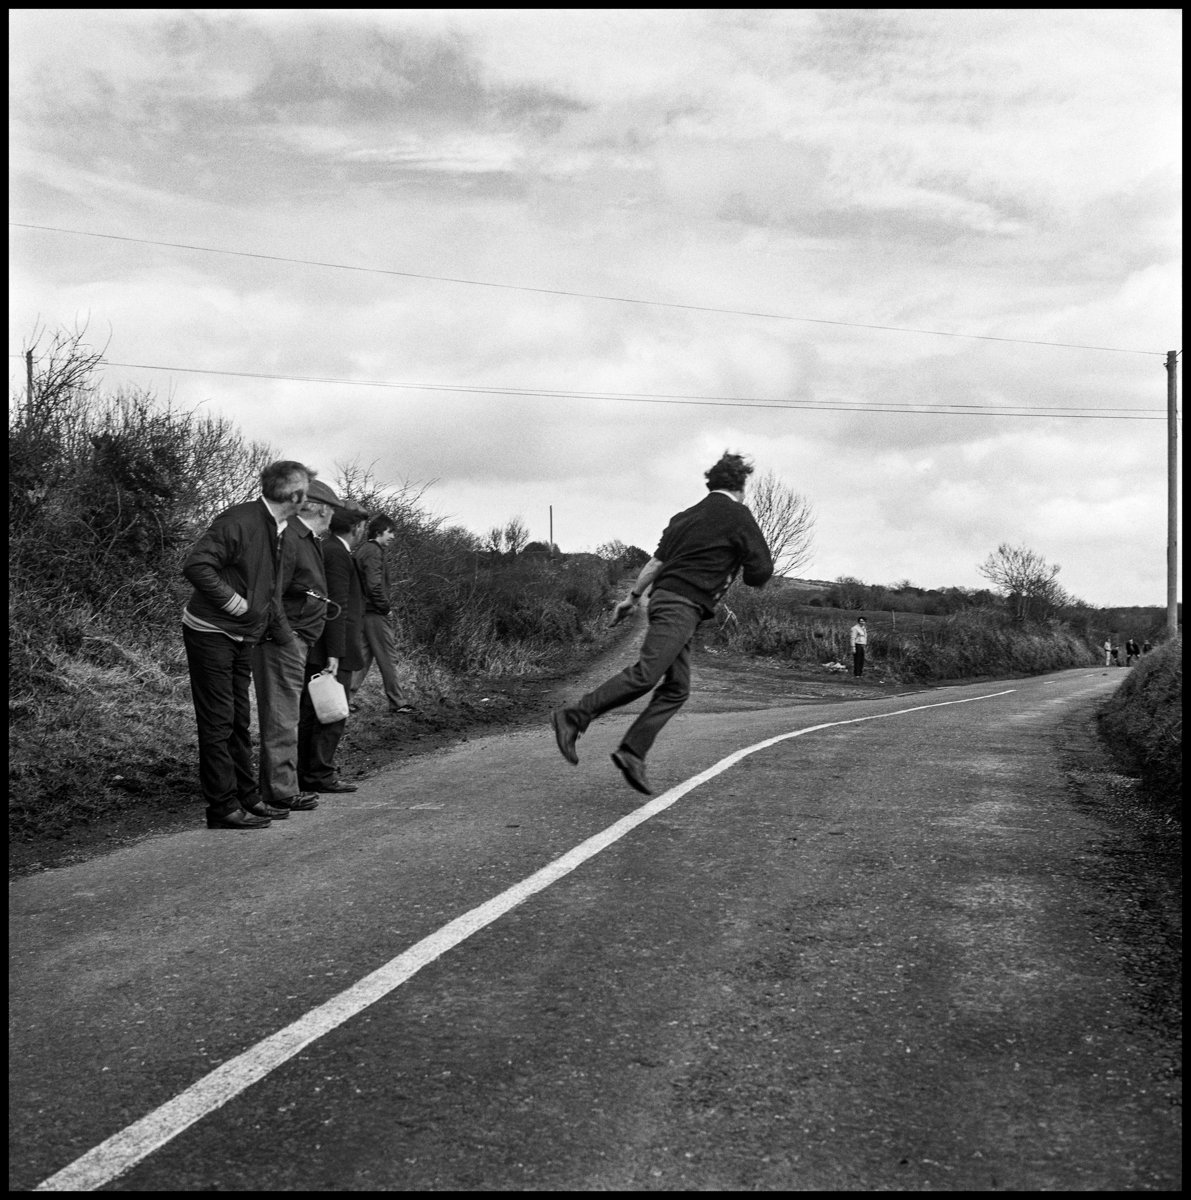 Throwing the Bullet, County Cork, 1987